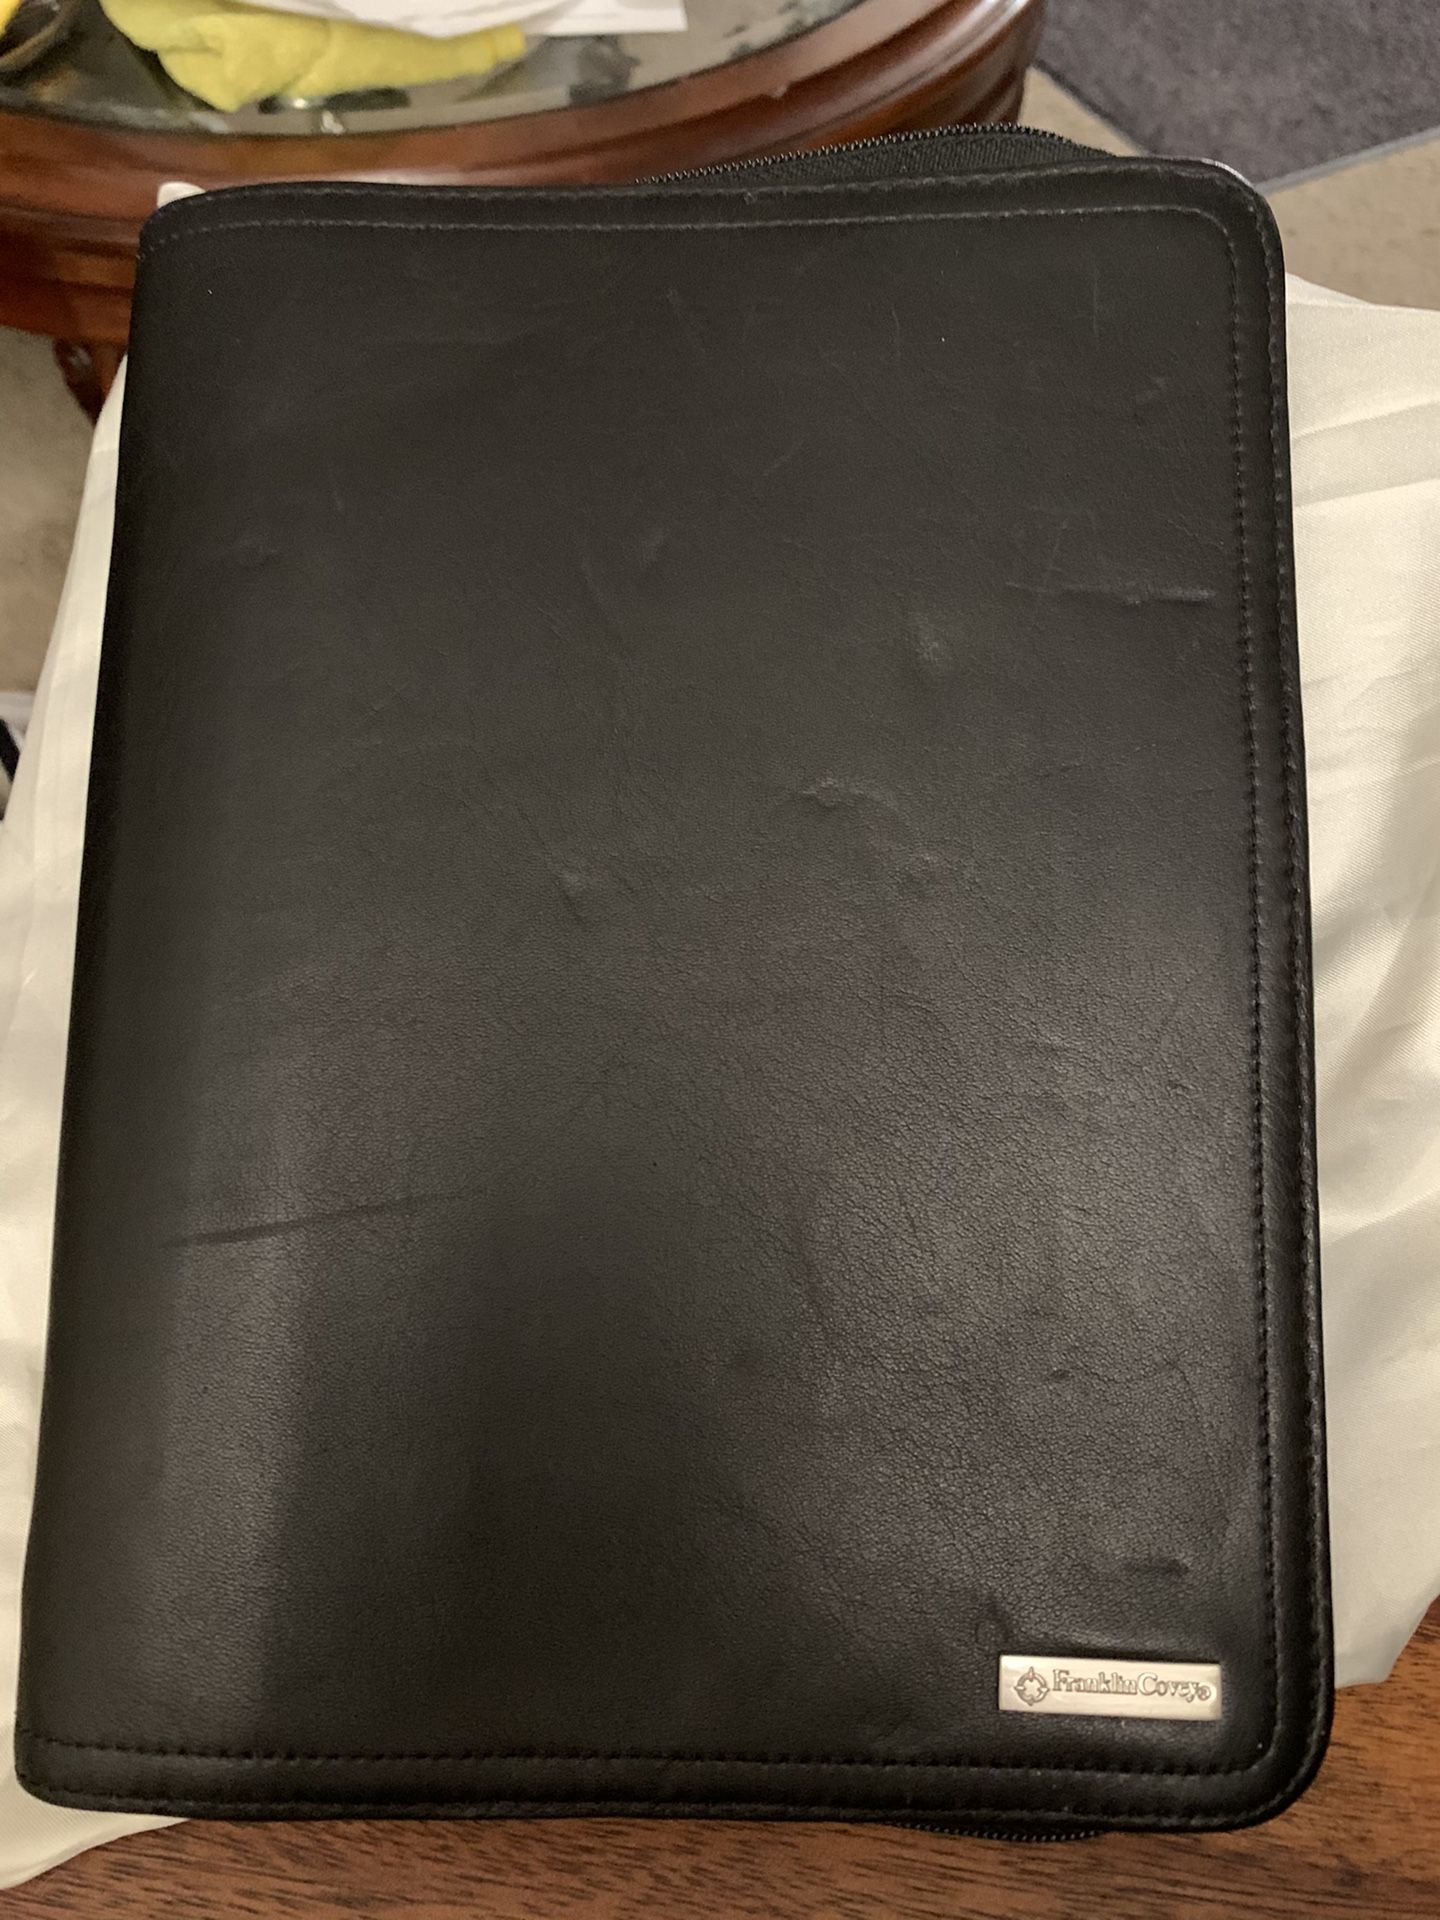 Franklin Covey Leather Agenda